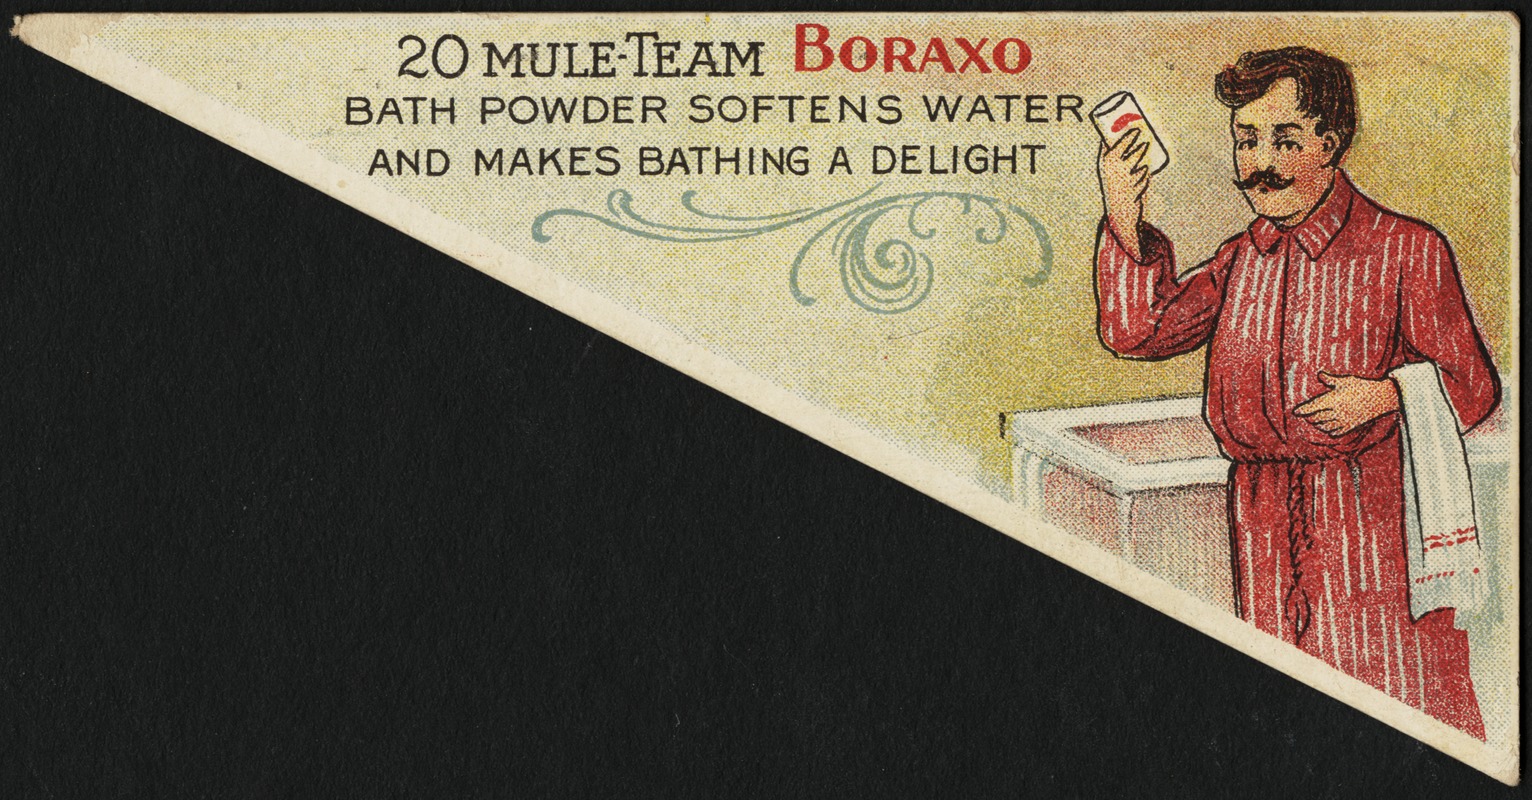 20 Mule-Team Boraxo bath powder softens water and makes bathing a delight